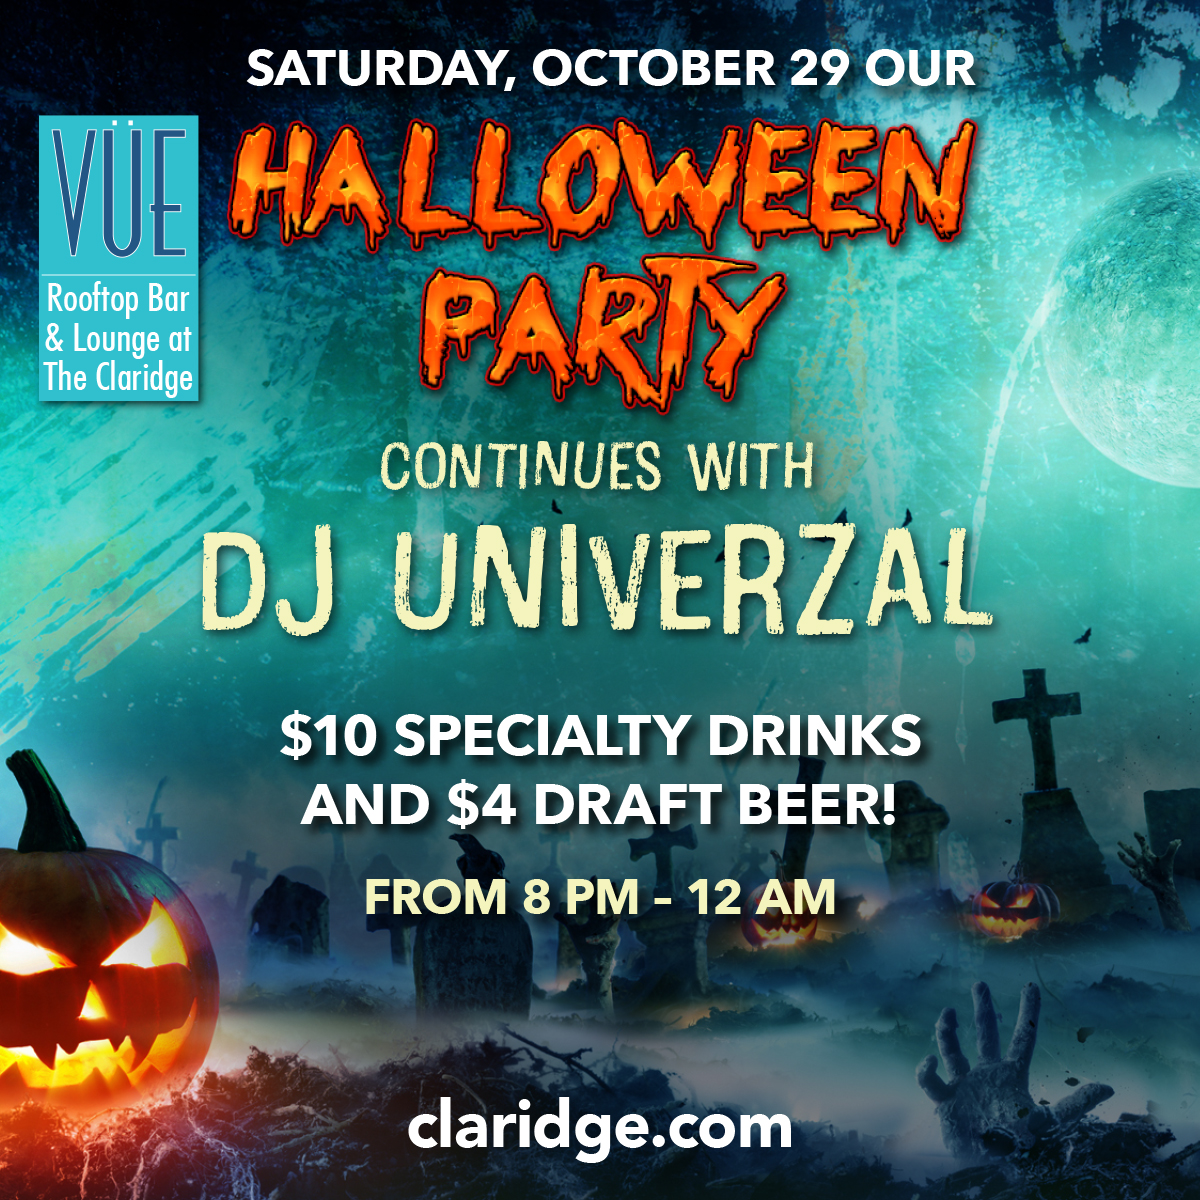 ARE YOU READY FOR NIGHT TWO?! Come celebrate Halloween with us tonight, Saturday, October 29th! Special guest DJ Univerzal, $10 specialty cocktails, and $4 draft beers! 🎃👻🍻 claridge.com